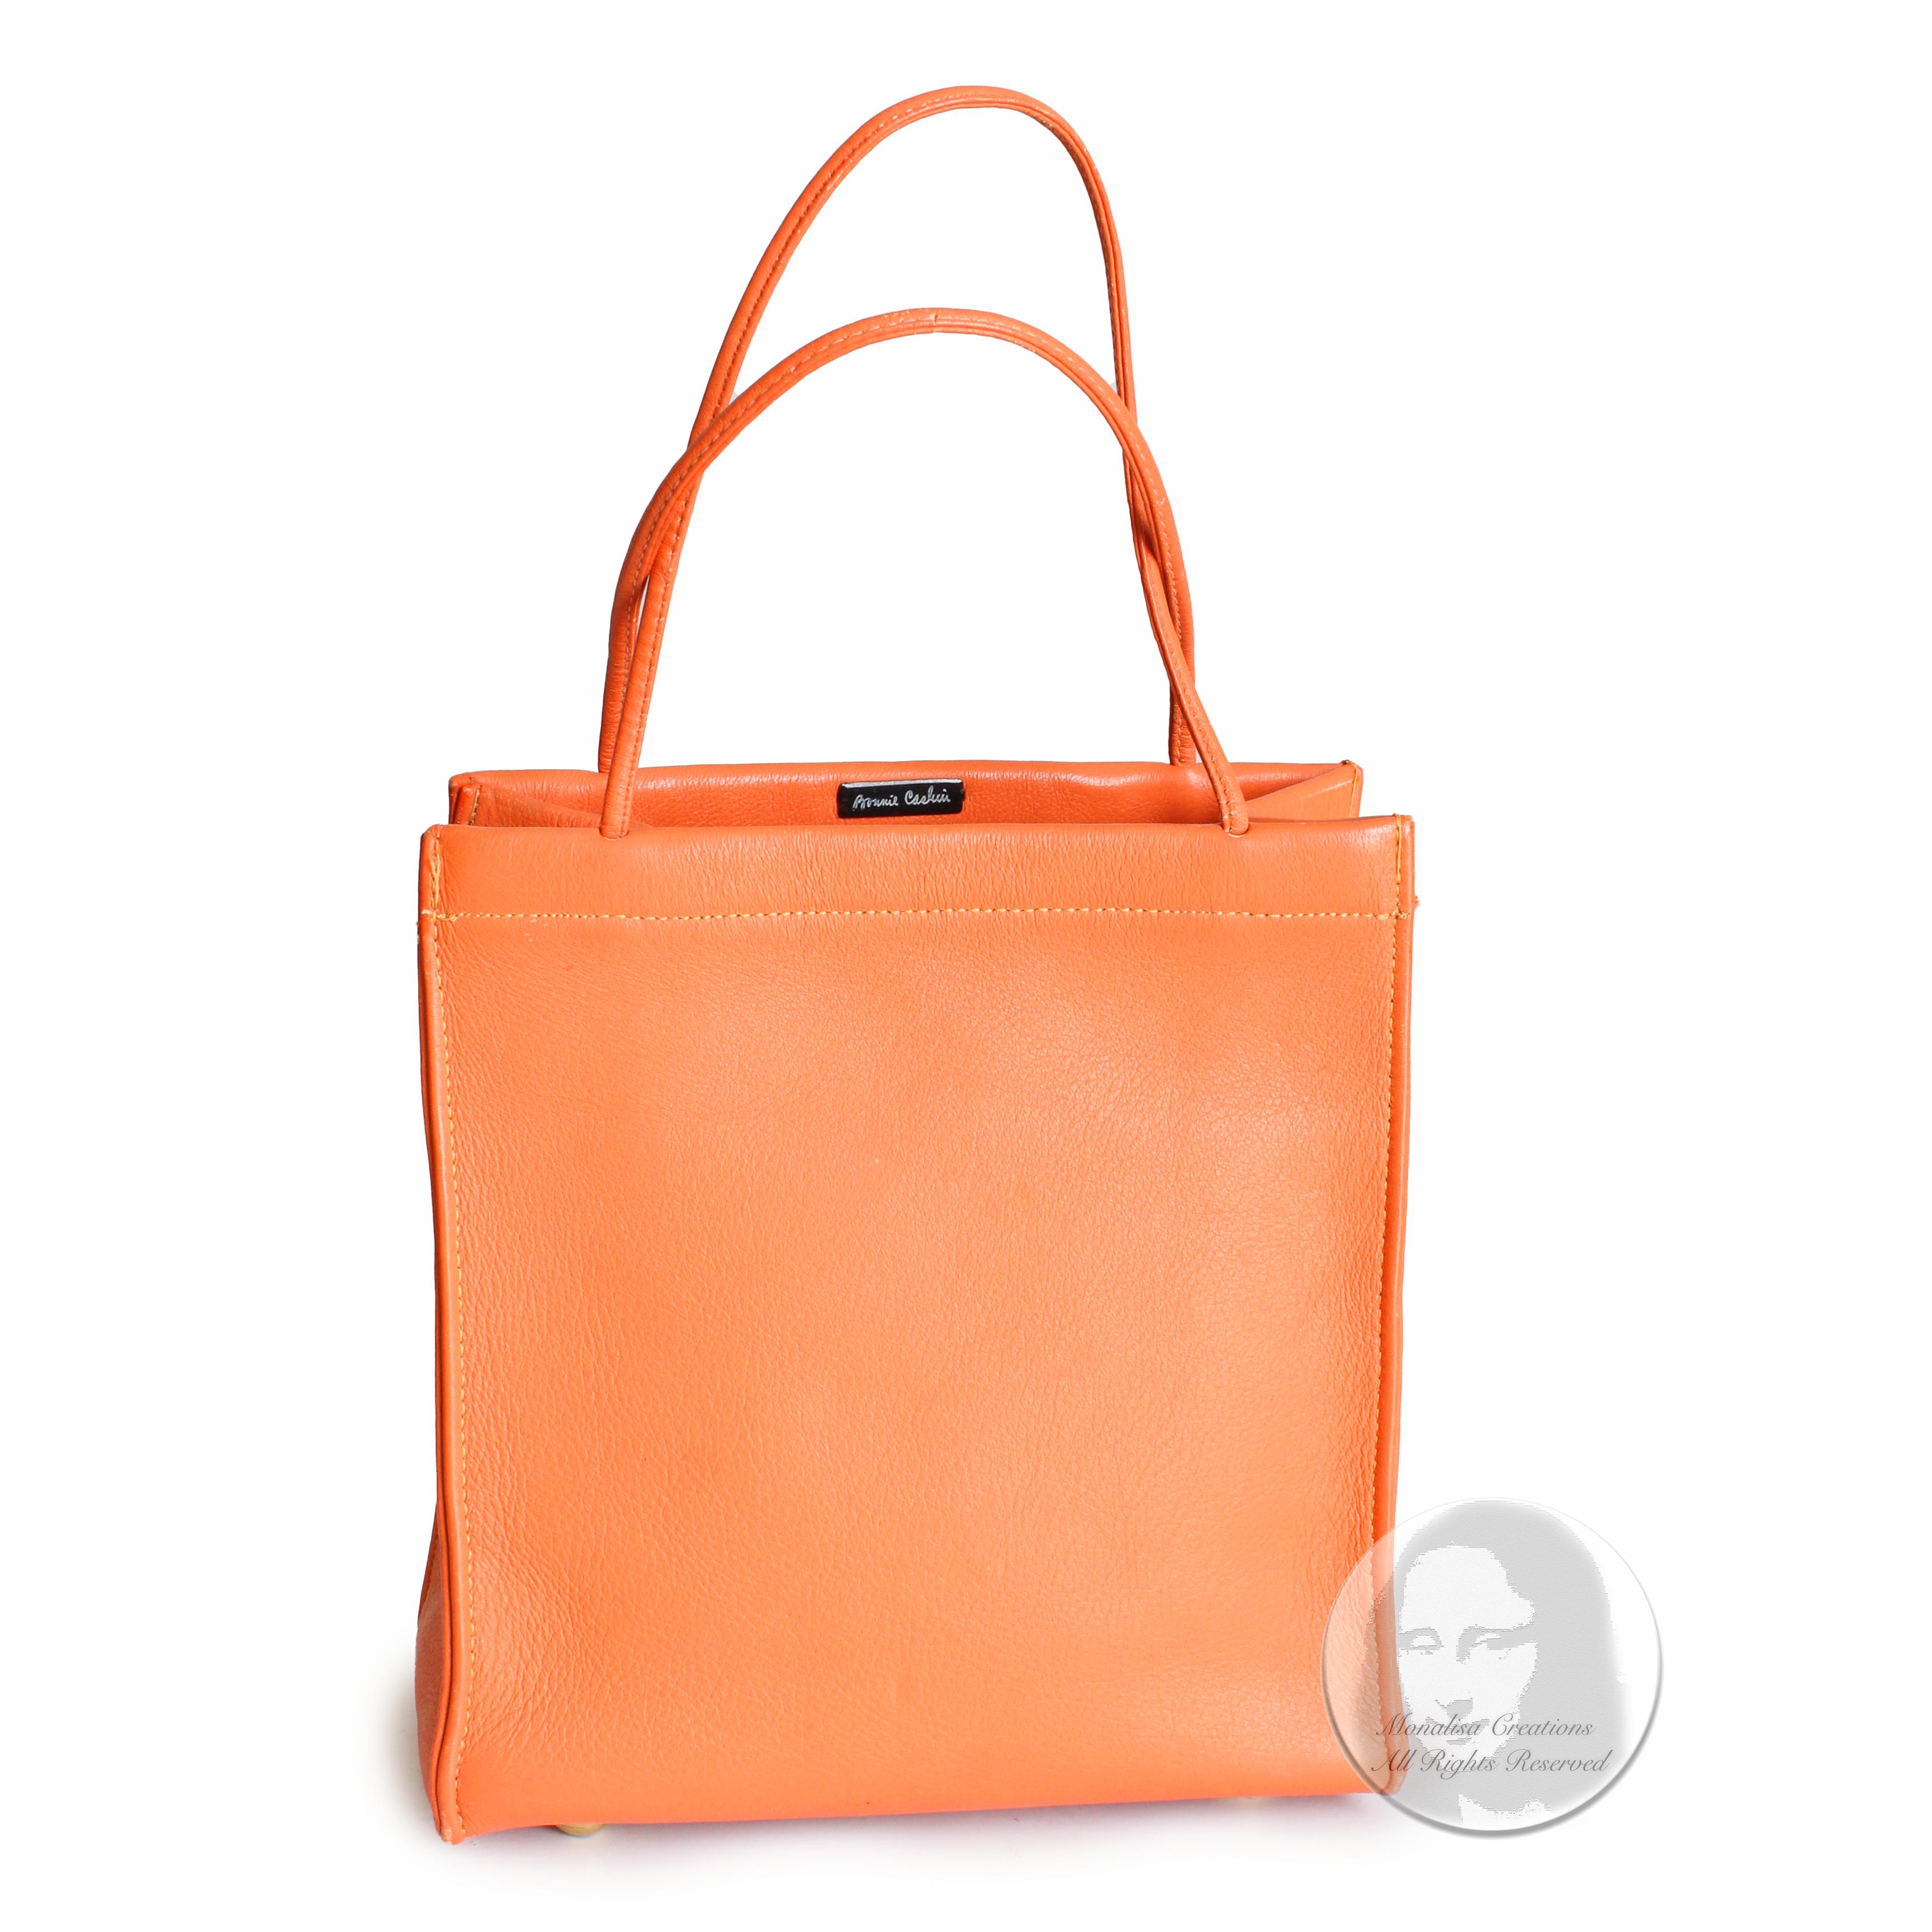 Authentic, preowned, vintage 60s Bonnie Cashin for Coach Mini Tote. A super cool bag in a rare color!! Made from a cantaloupe-hued orange leather, it's lined in Bonnie's signature striped lining and has one slip pocket inside!   

Made in the USA.